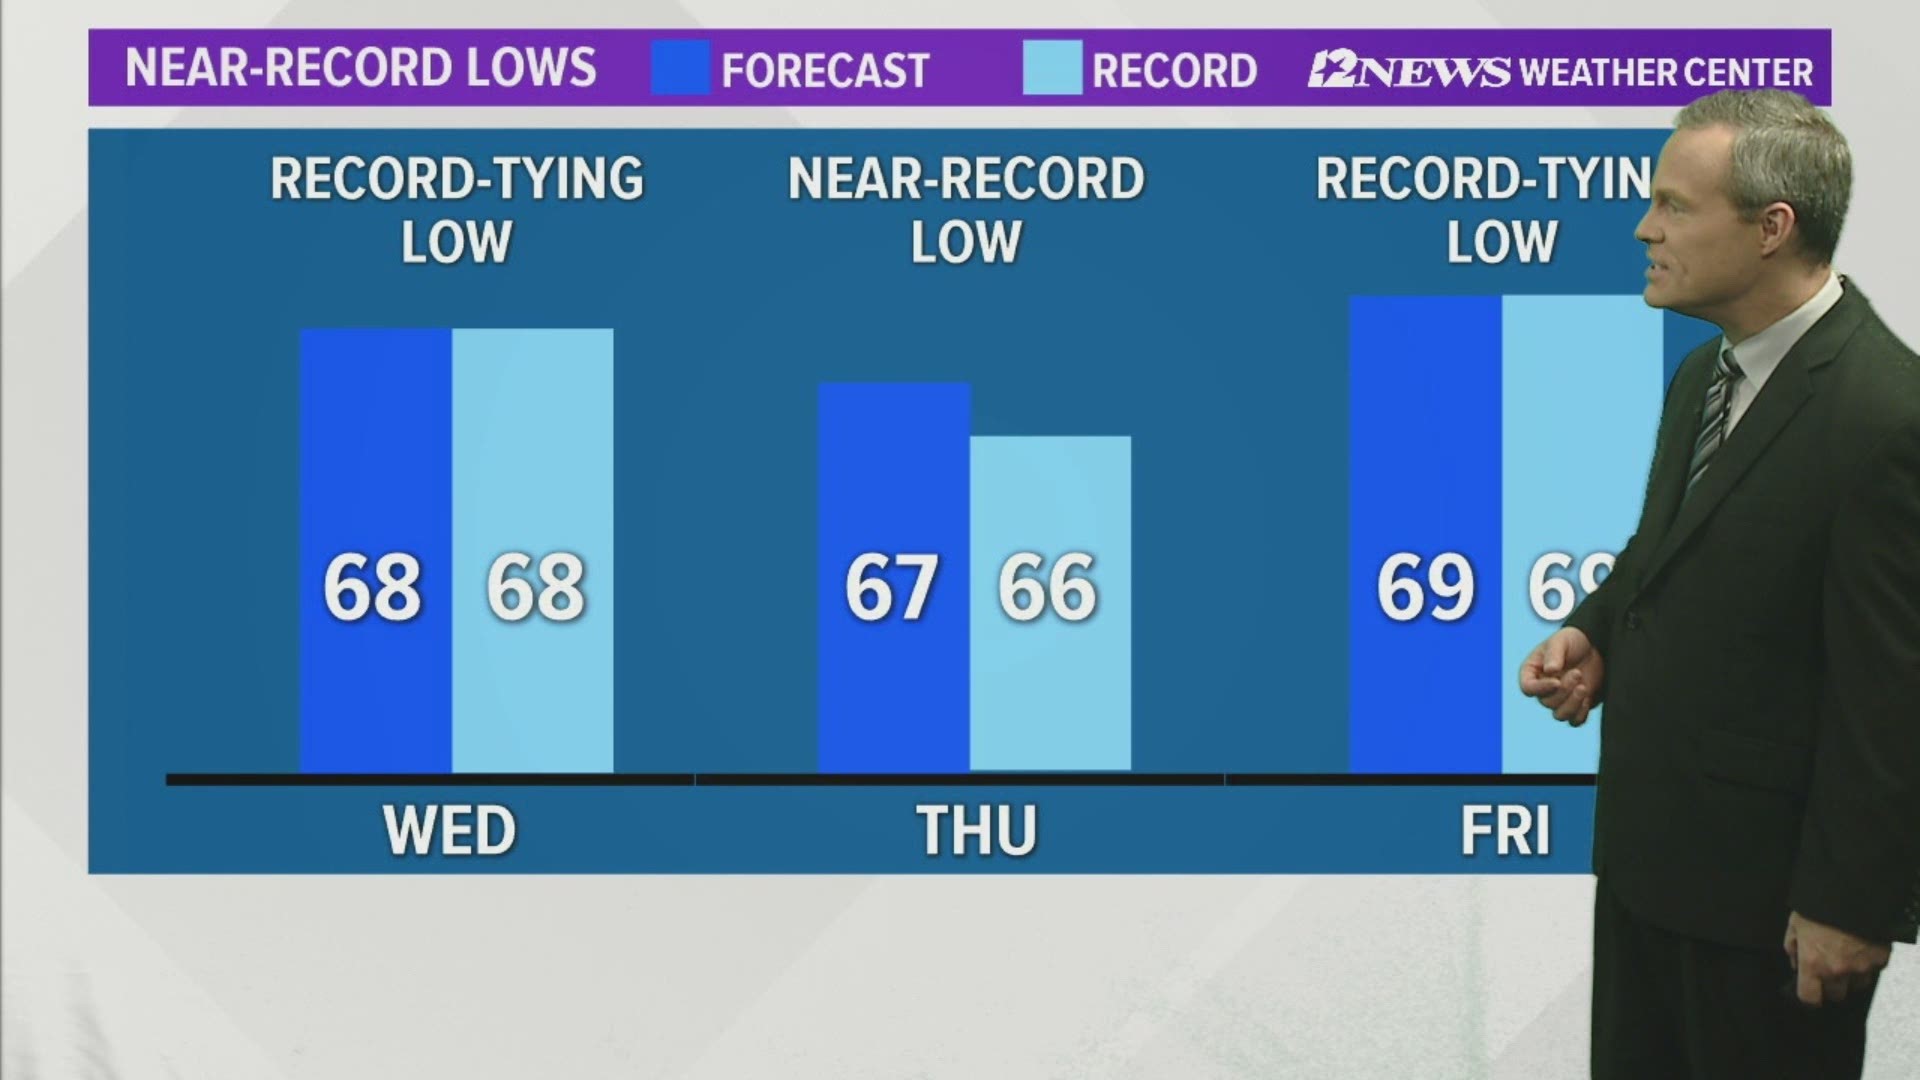 Thanks to our cold front this morning, low temperatures will likely be near record lows through Friday.  Each afternoon will be sunny with low humidity.  Wet weather returns to the area this weekend into early next week.